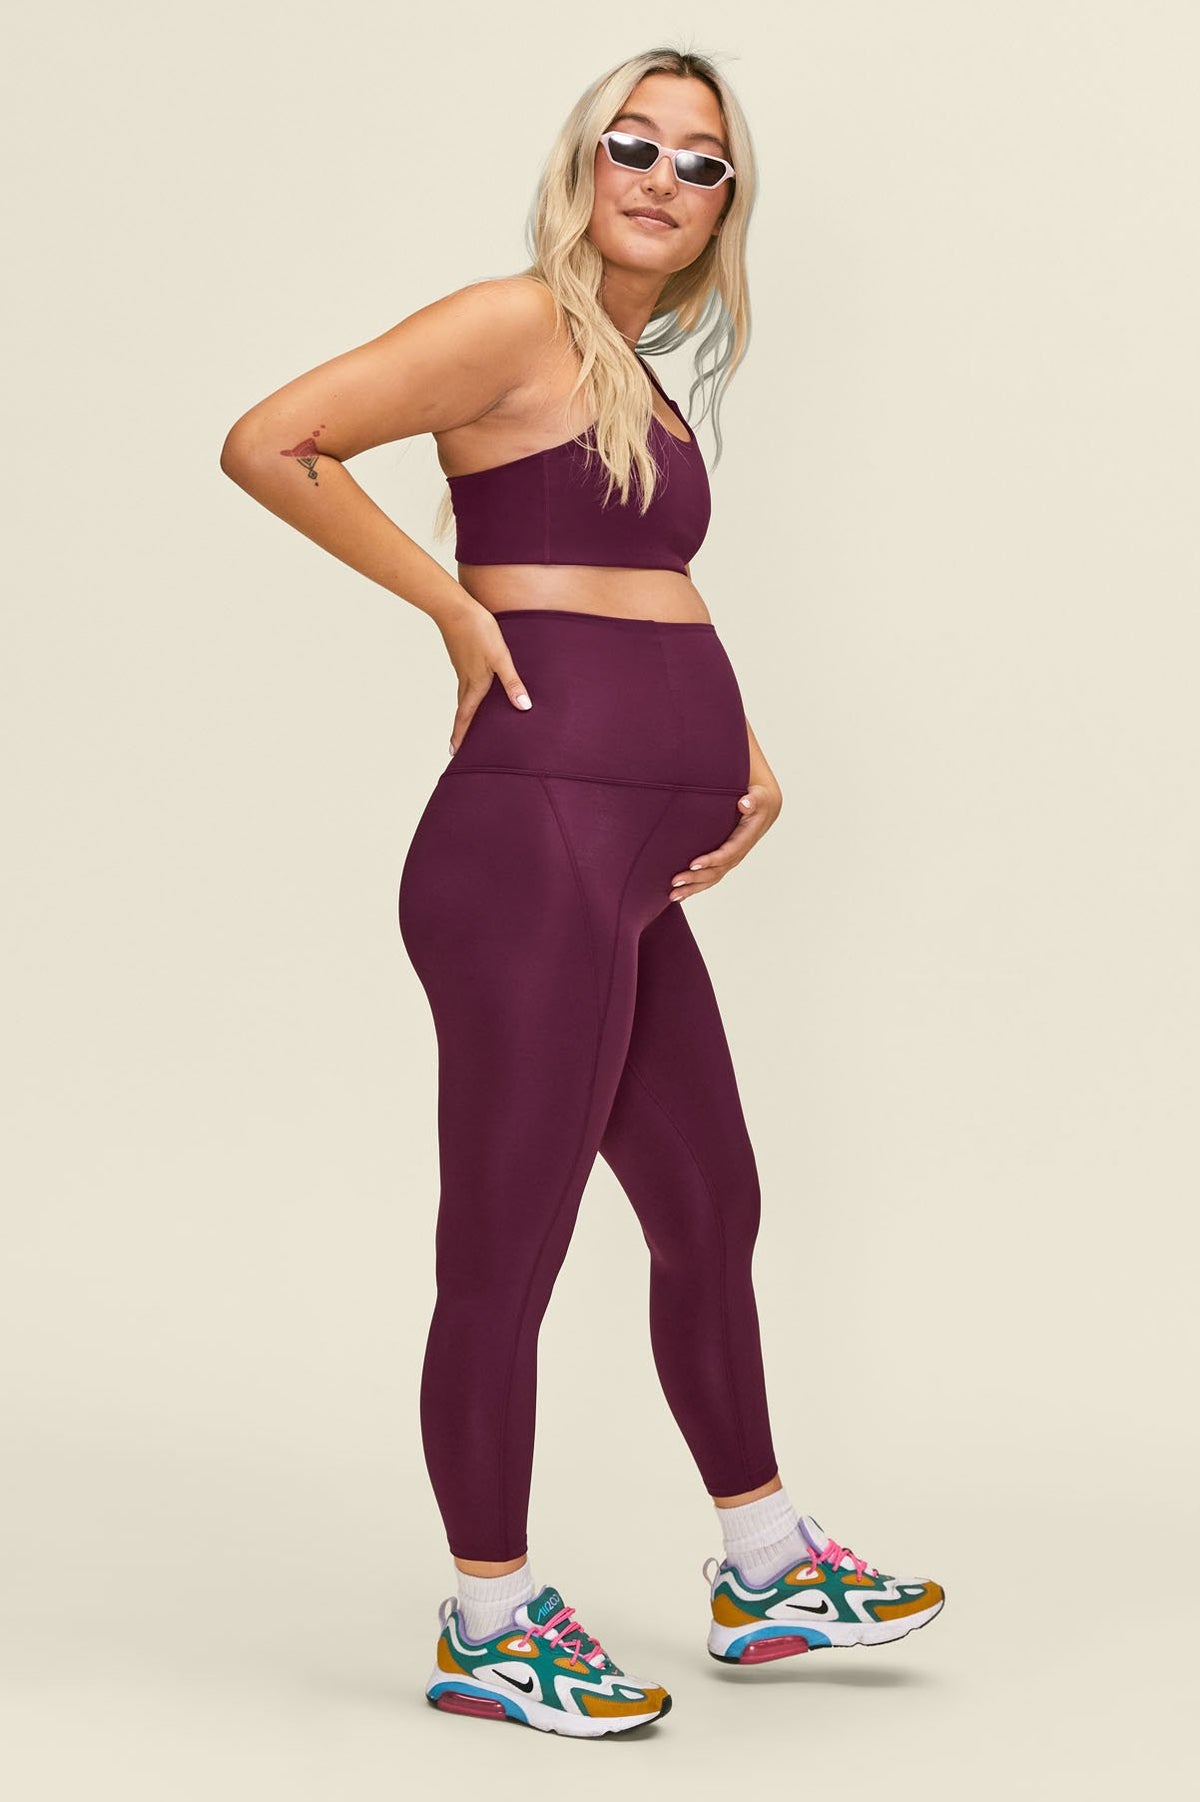 Oprah Loves These Girlfriend Collective Leggings That Are 20% Off